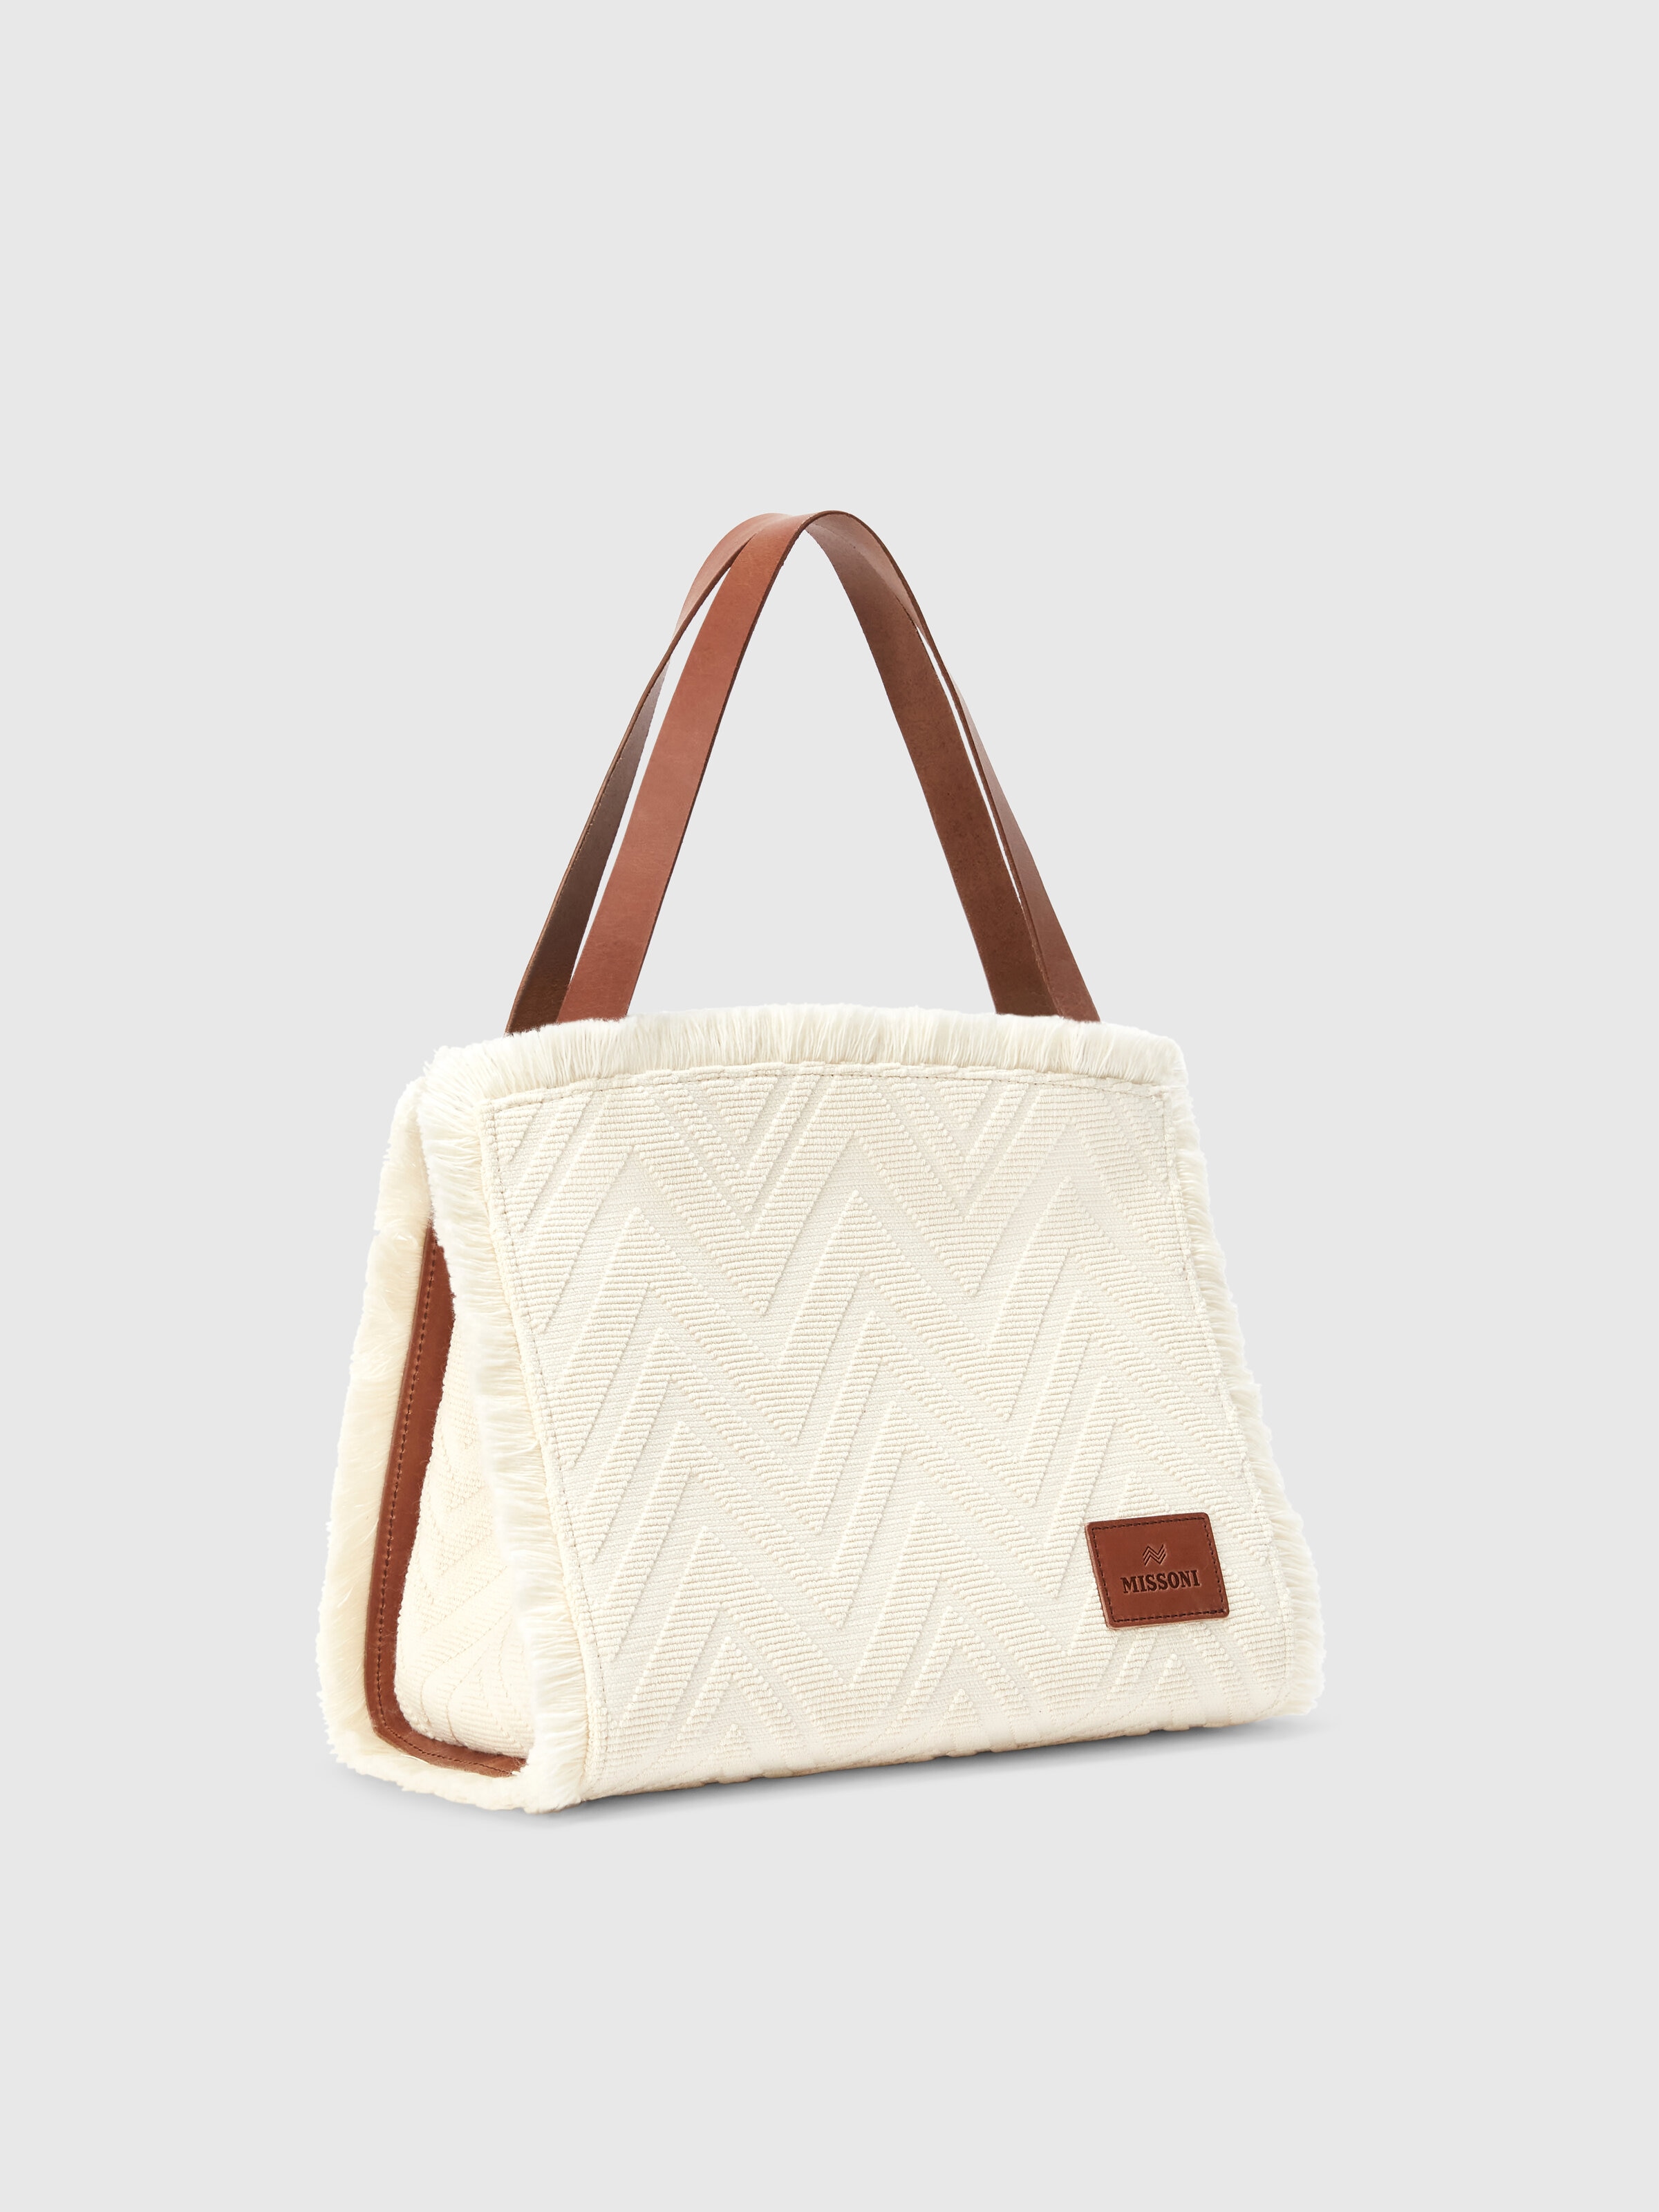 Tote bag in cotton blend with chevron pattern, Brown - 1